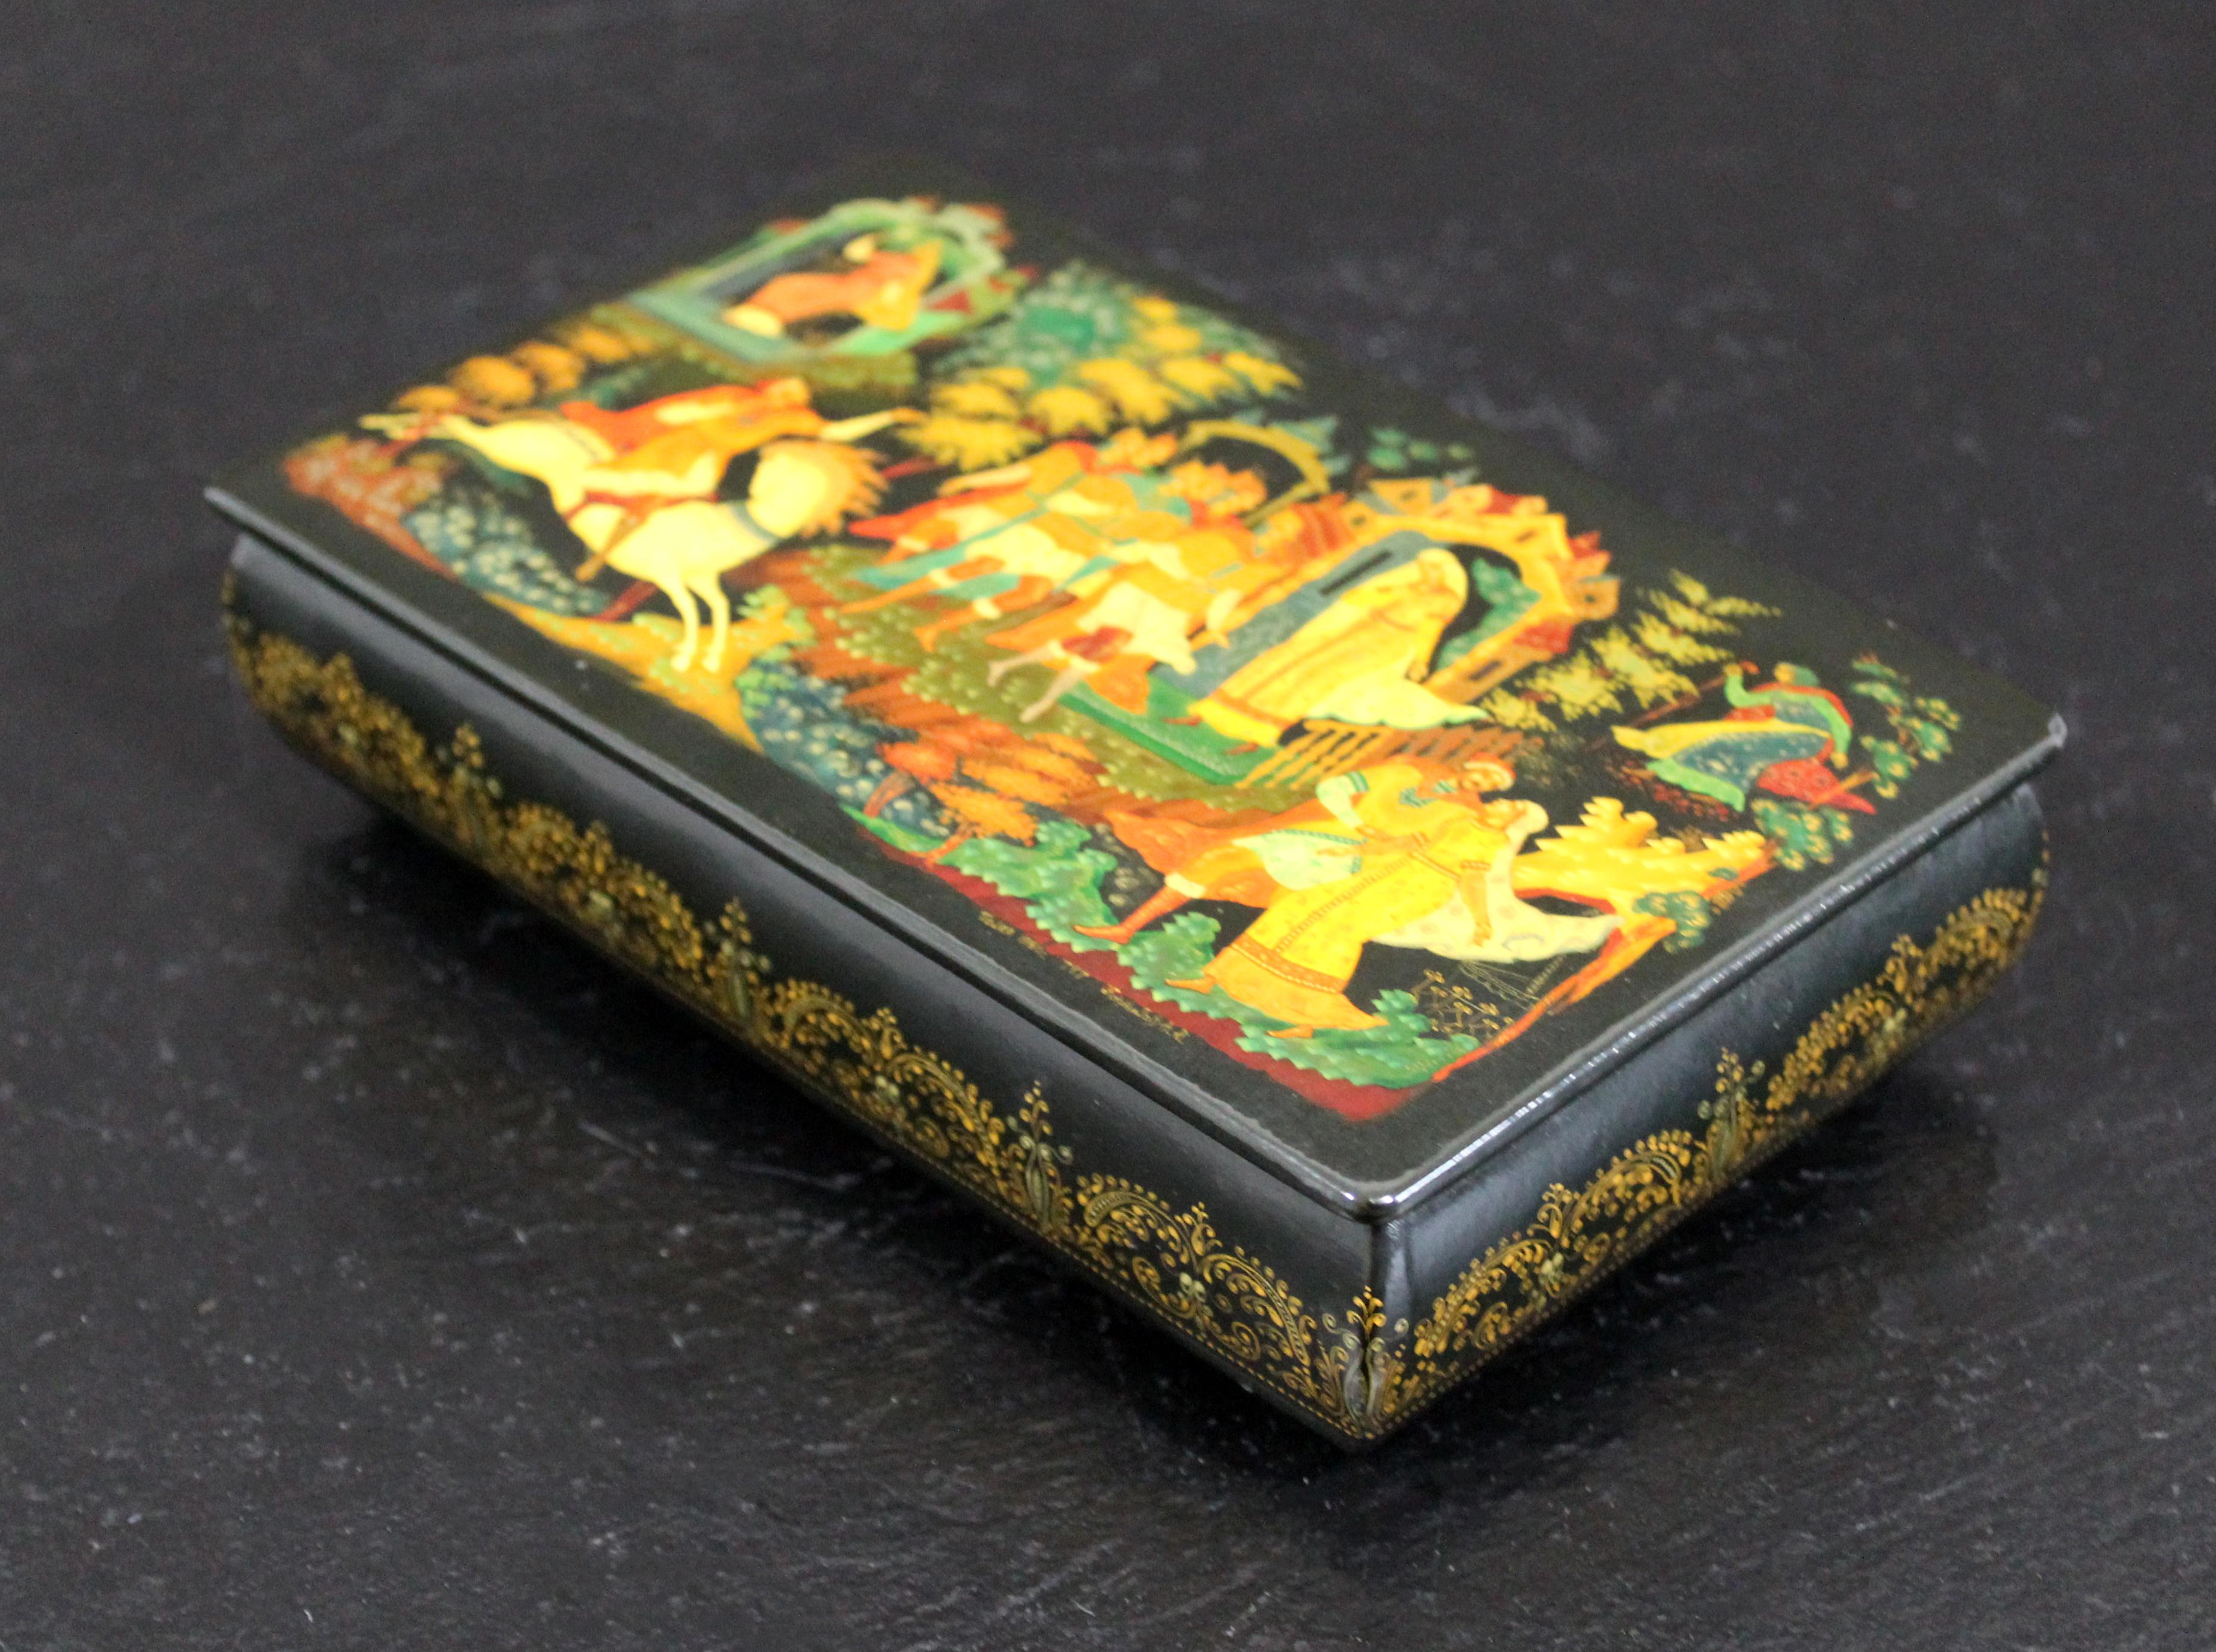 For your consideration is a luxe looking, lidded, hand painted, Russian Lacquer palekh box, signed by Kornilov Alexander Albertovich. This piece offers intricate folk lore paintings. In excellent antique condition. The dimensions are 6.5